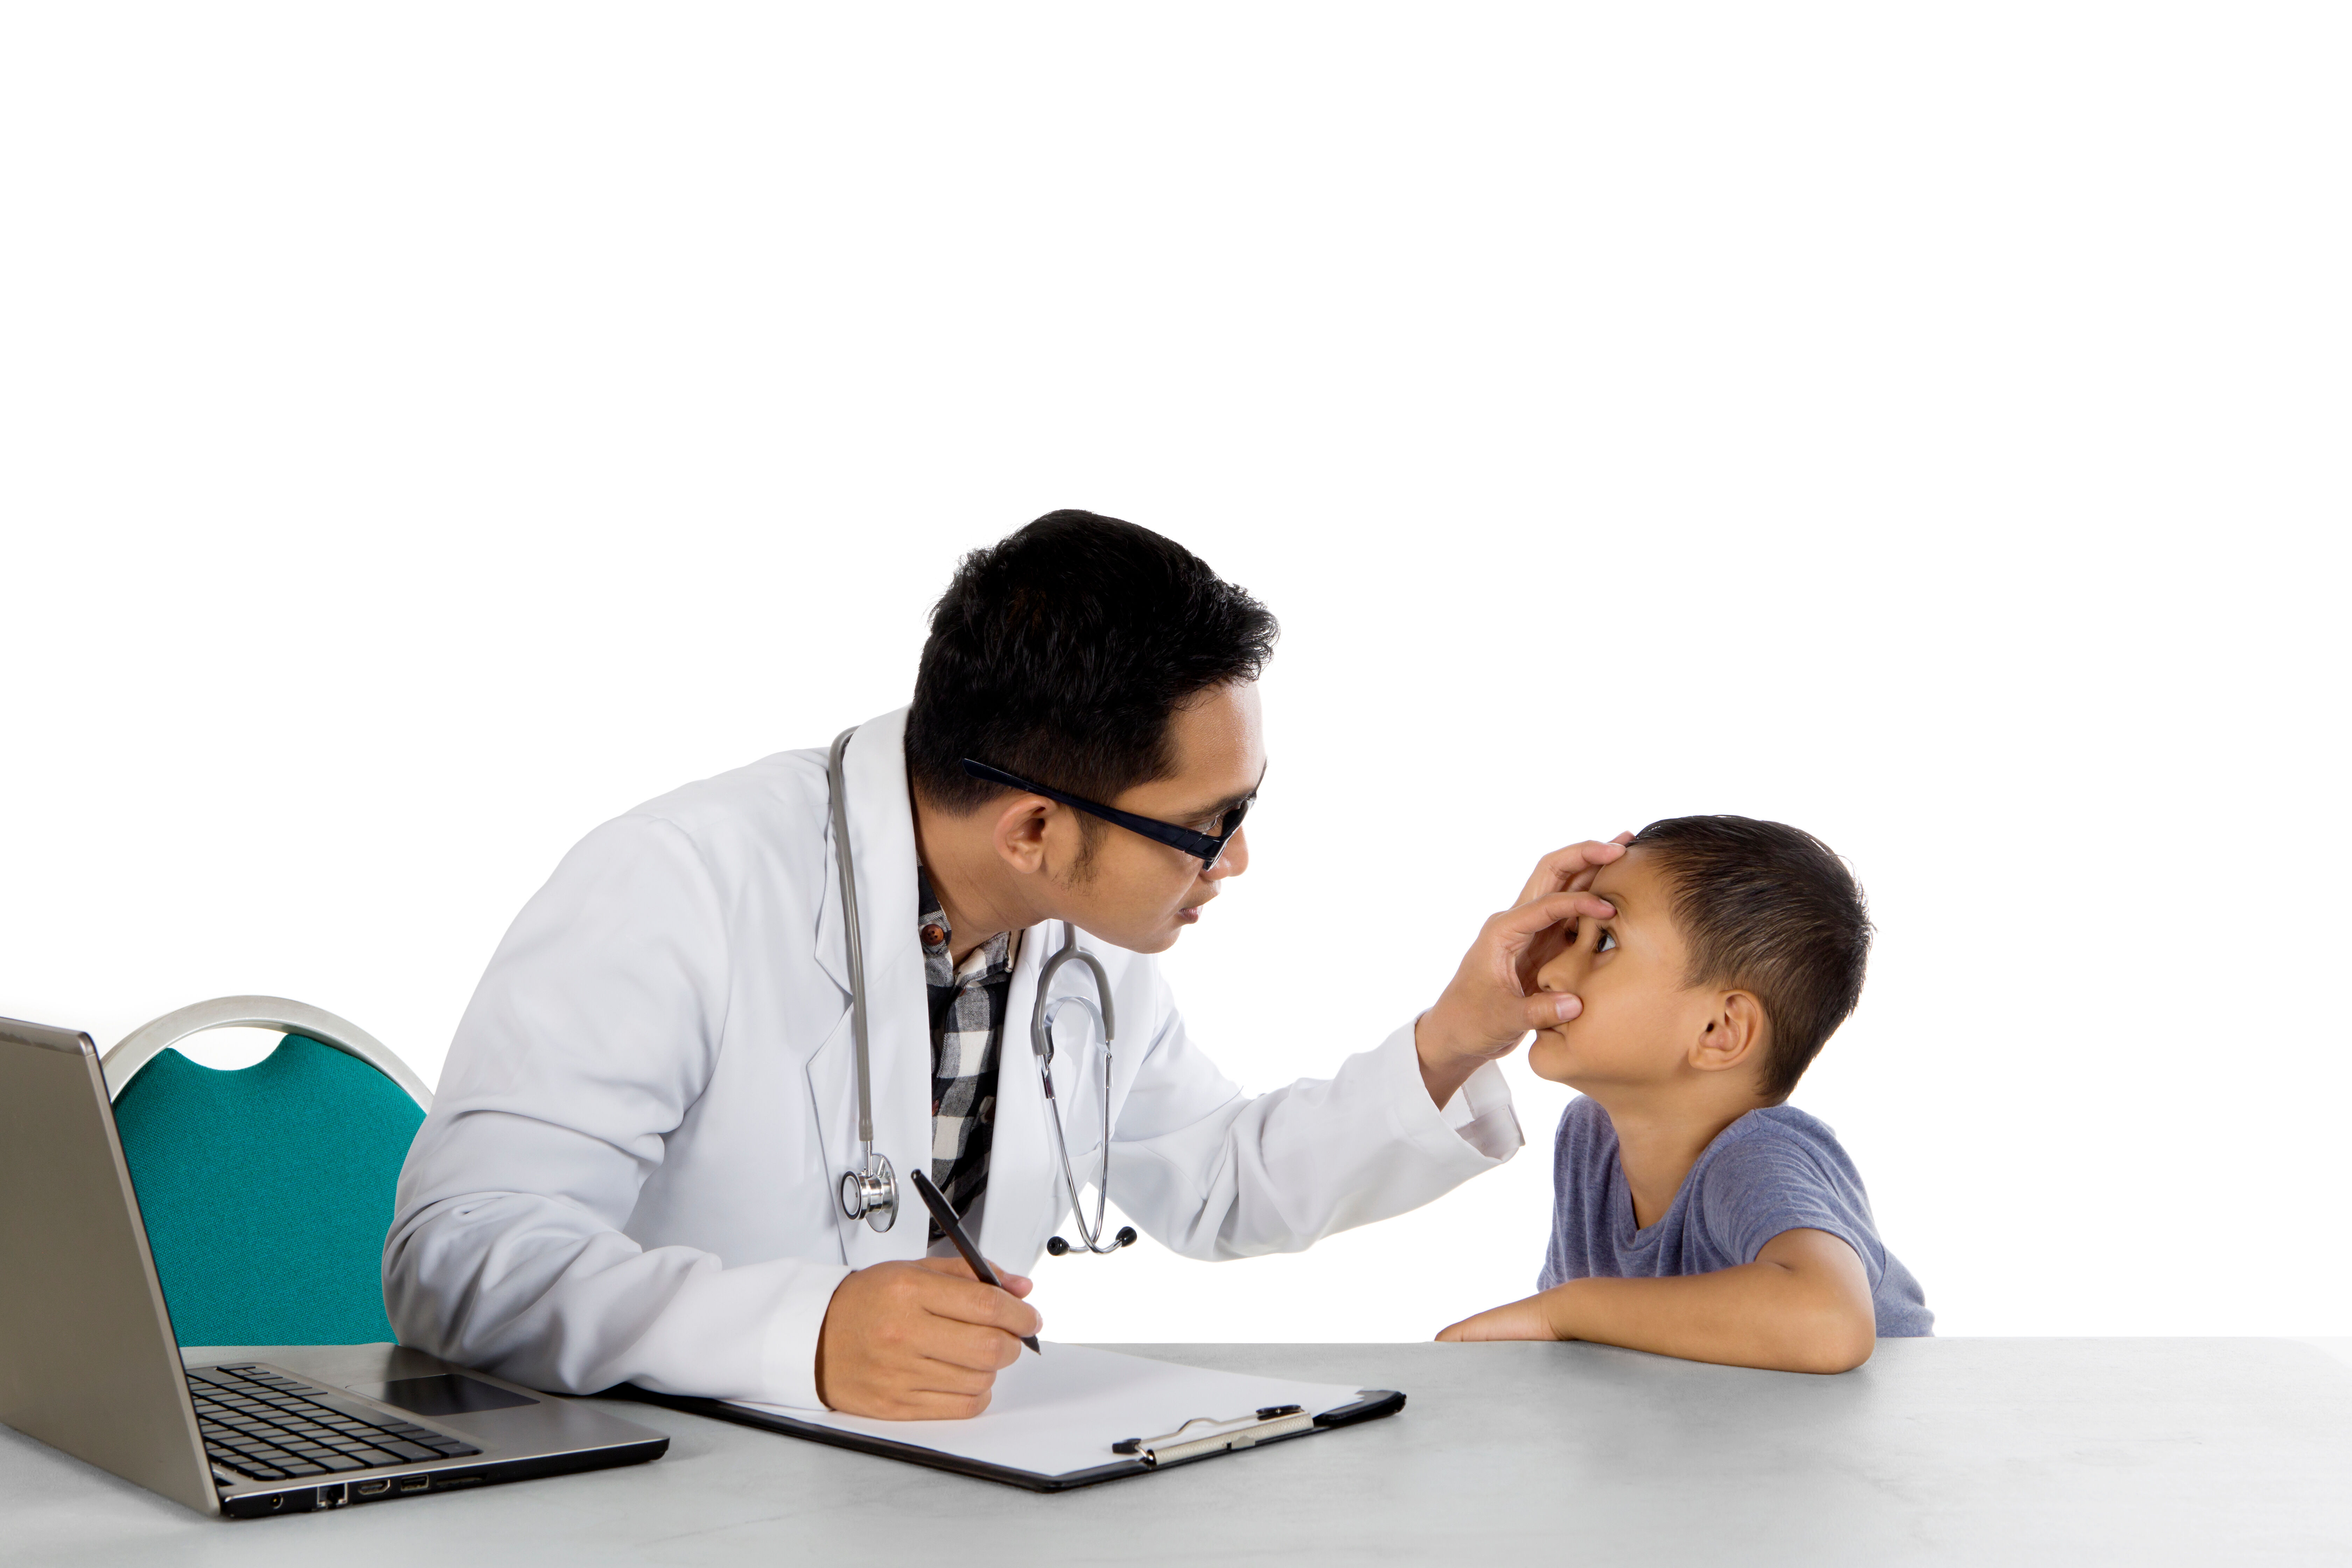 Examination of conjunctivitis in a child